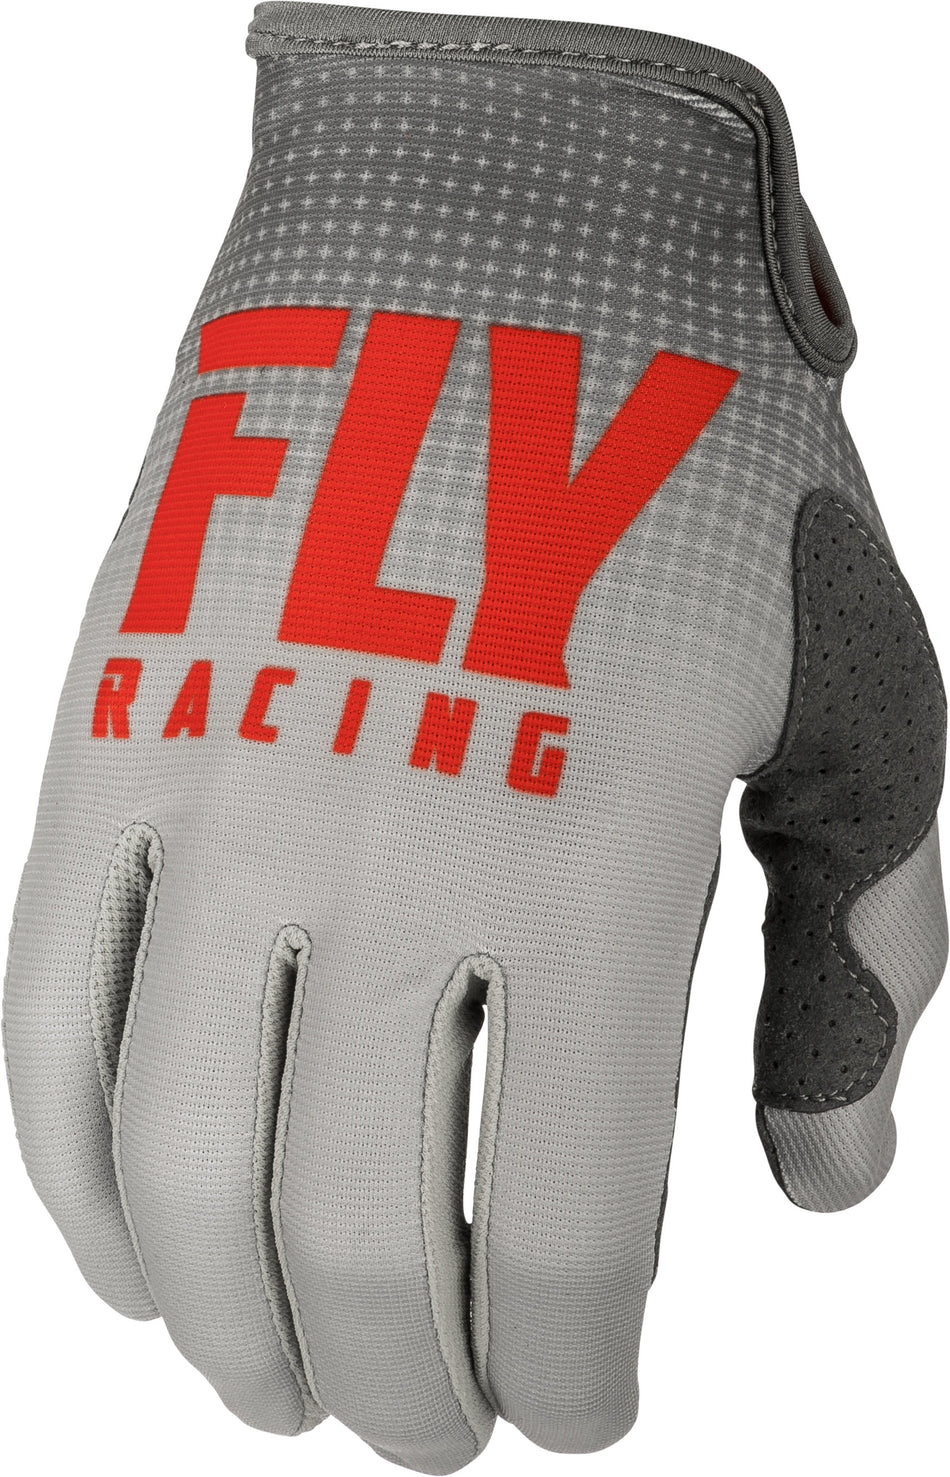 FLY RACING Lite Gloves Red/Grey Sz 13 372-01213